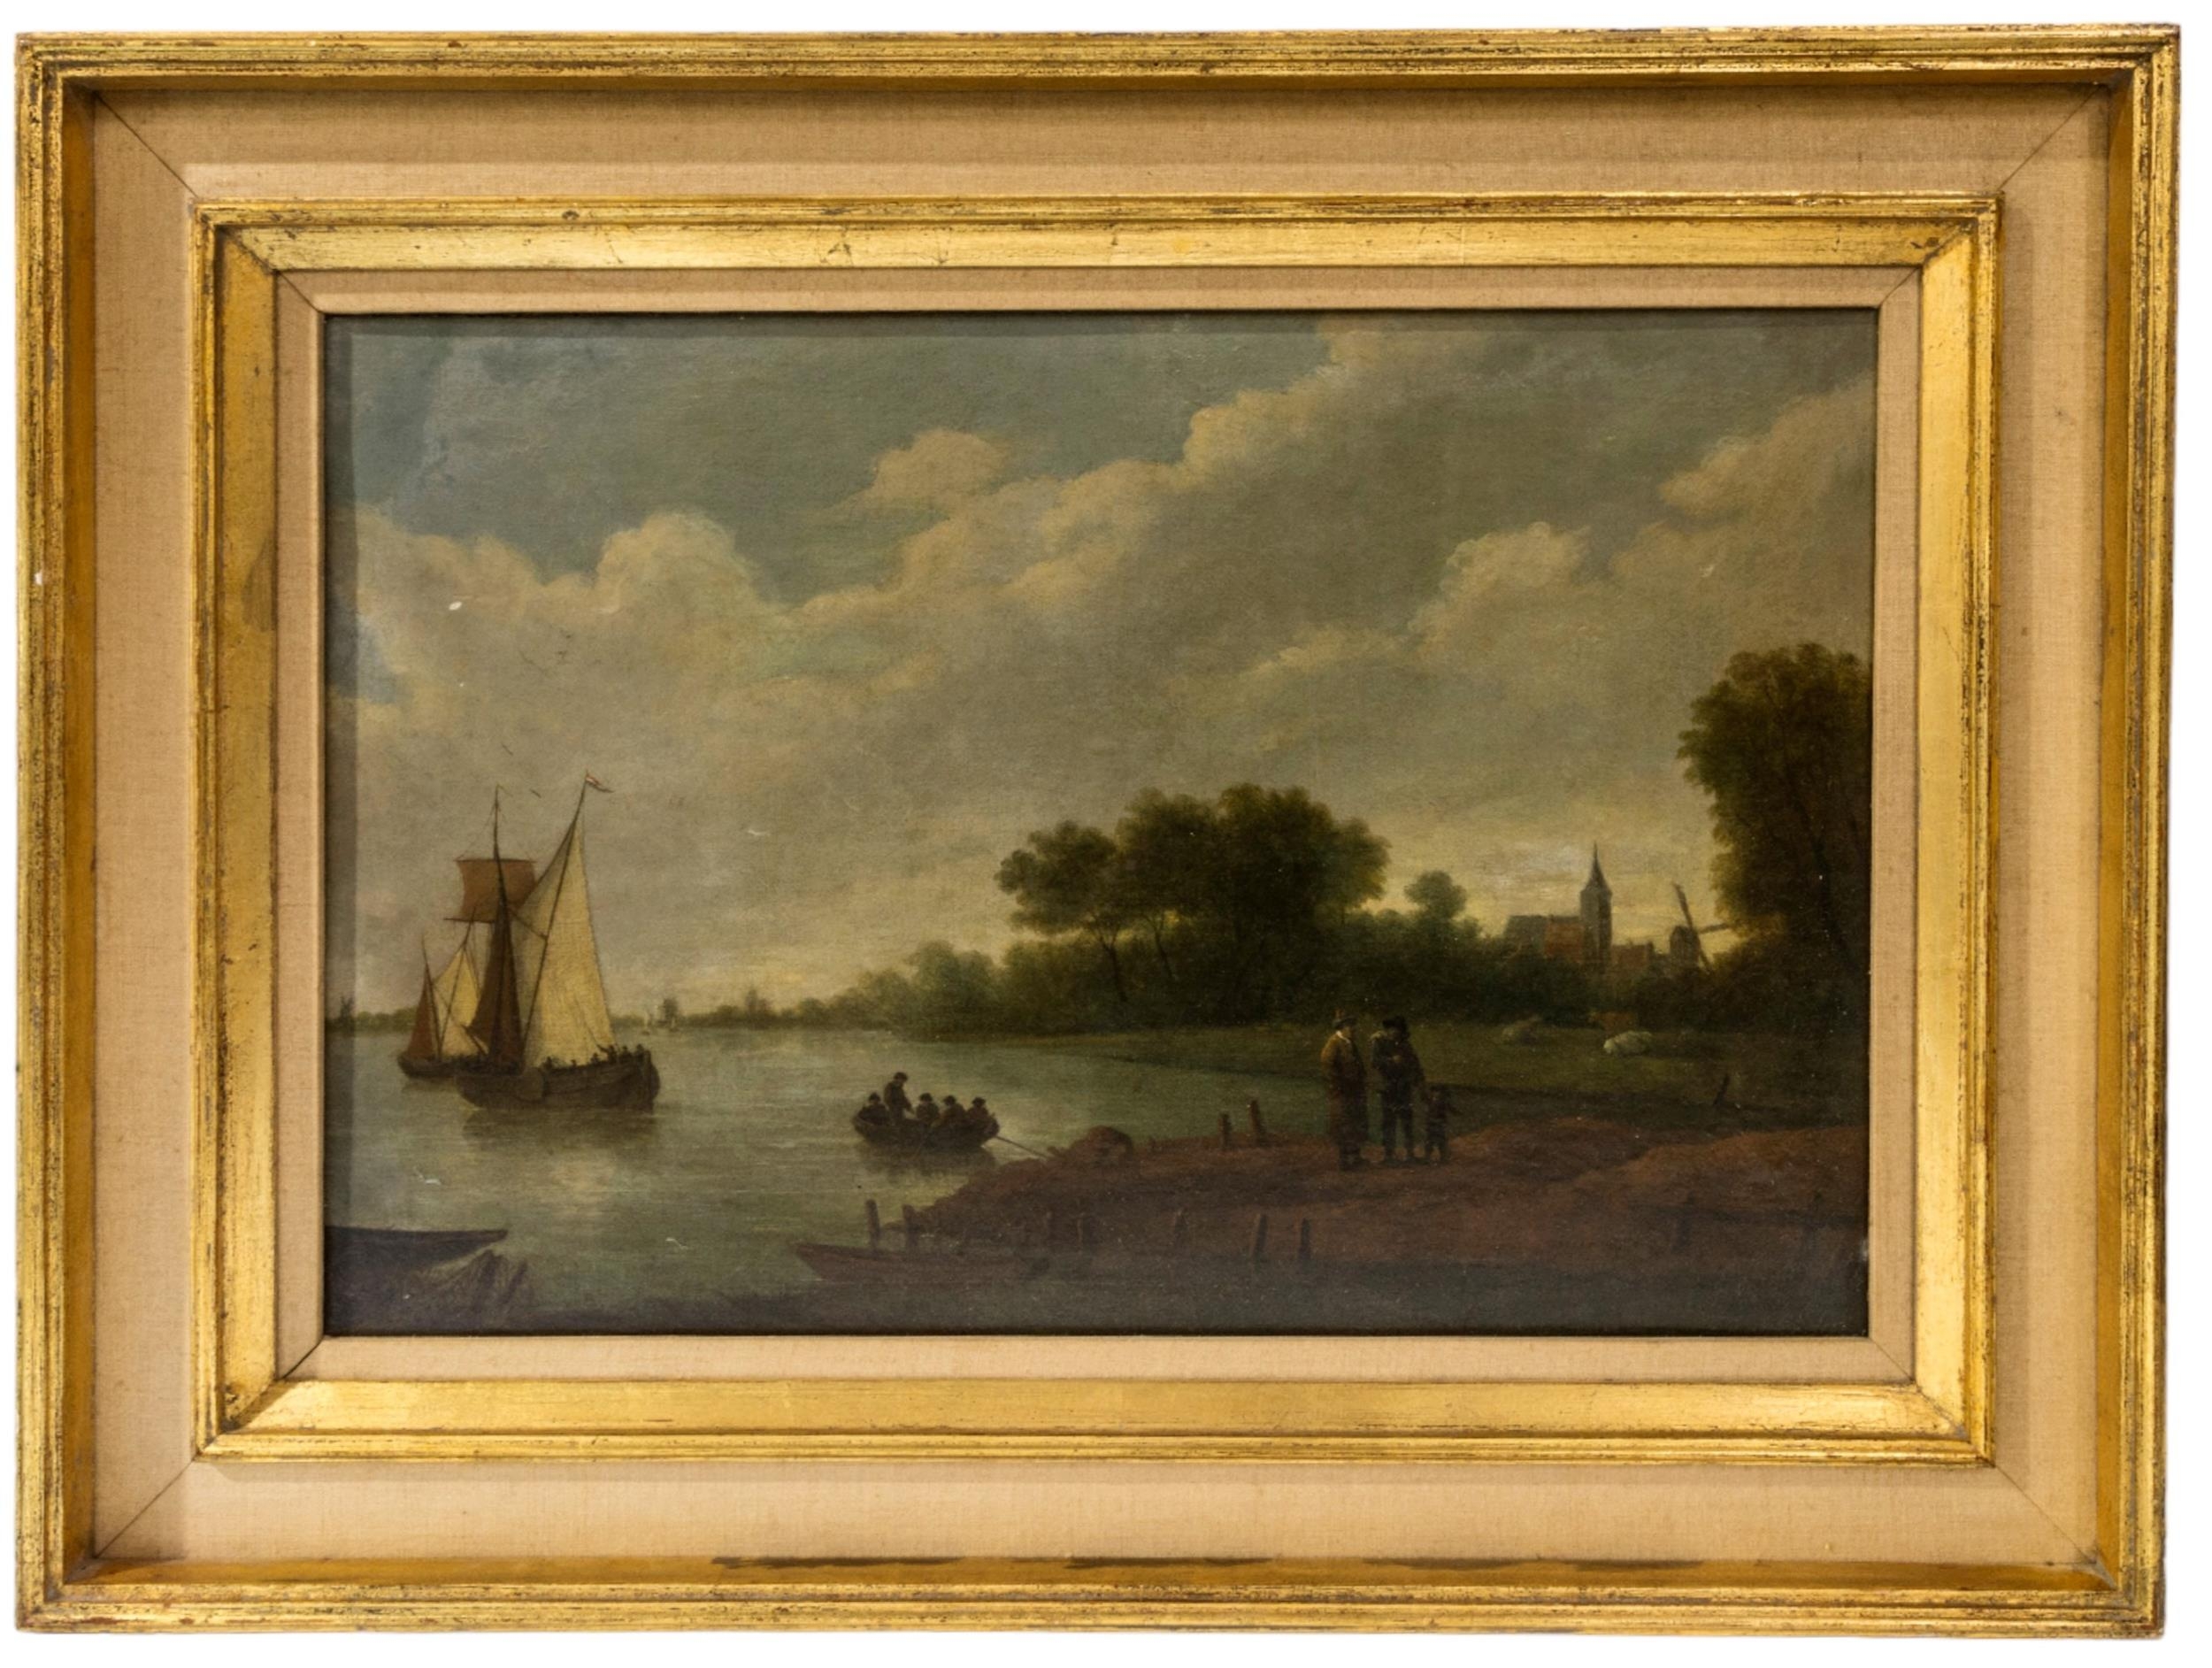 DUTCH SCHOOL, 19TH CENTURY RIVER SCENE OIL PAINTING ON CANVAS, depicting figures on a river bank